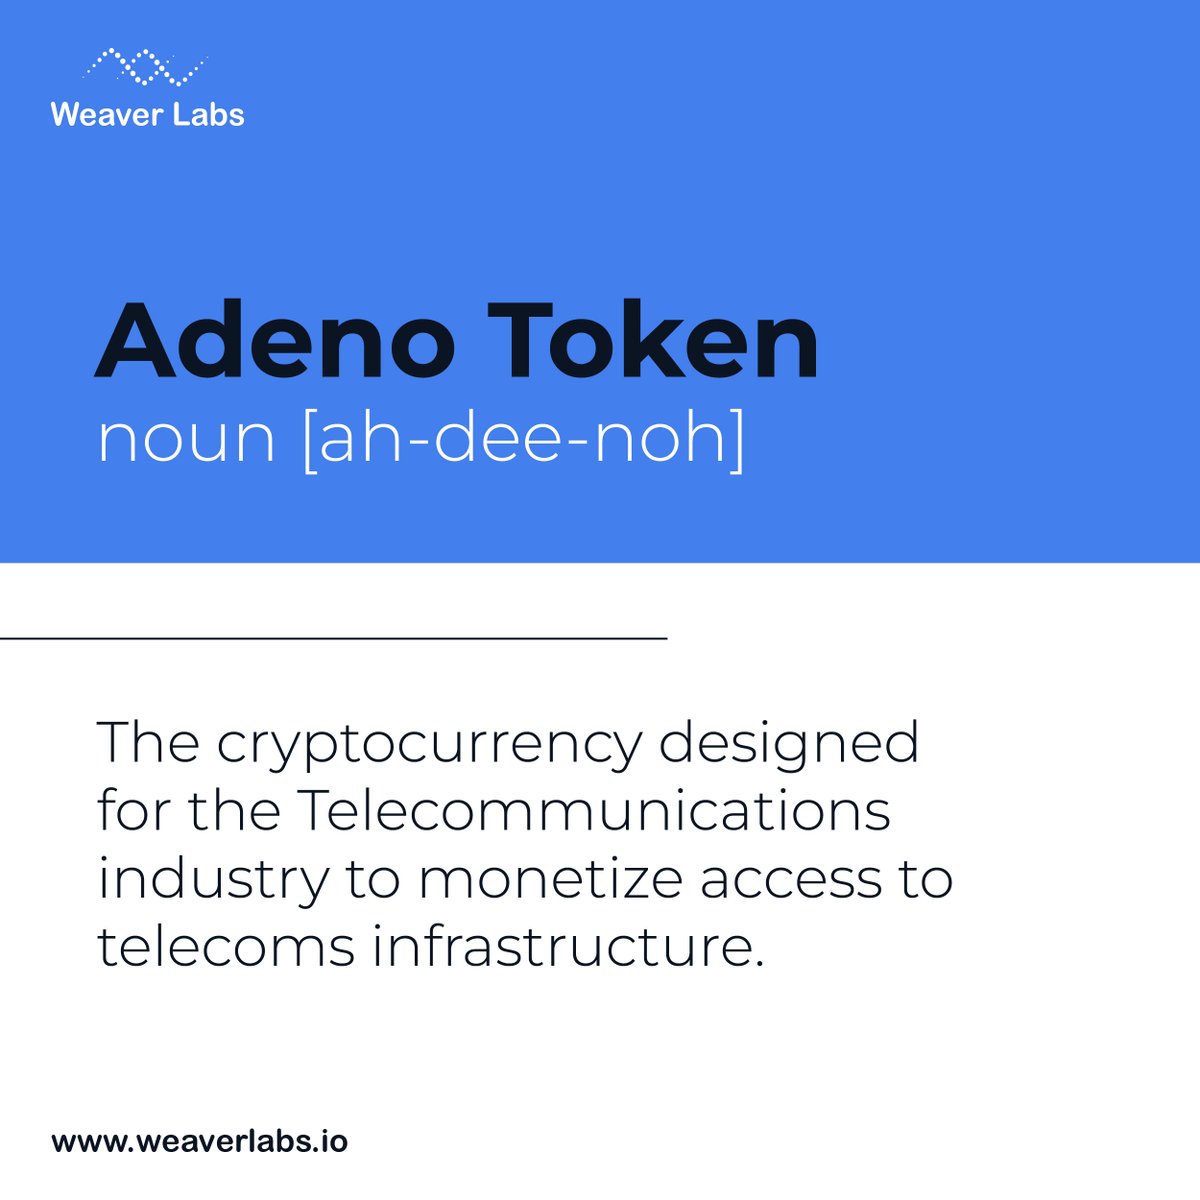 Adeno helps companies monetize their telecom assets, promoting a system where no single telco company has complete control❌. Instead, it's shared among multiple players, thanks to blockchain✅.

Get ready for our flash pre-sale STARTING TOMORROW!  

#WeaverLabs